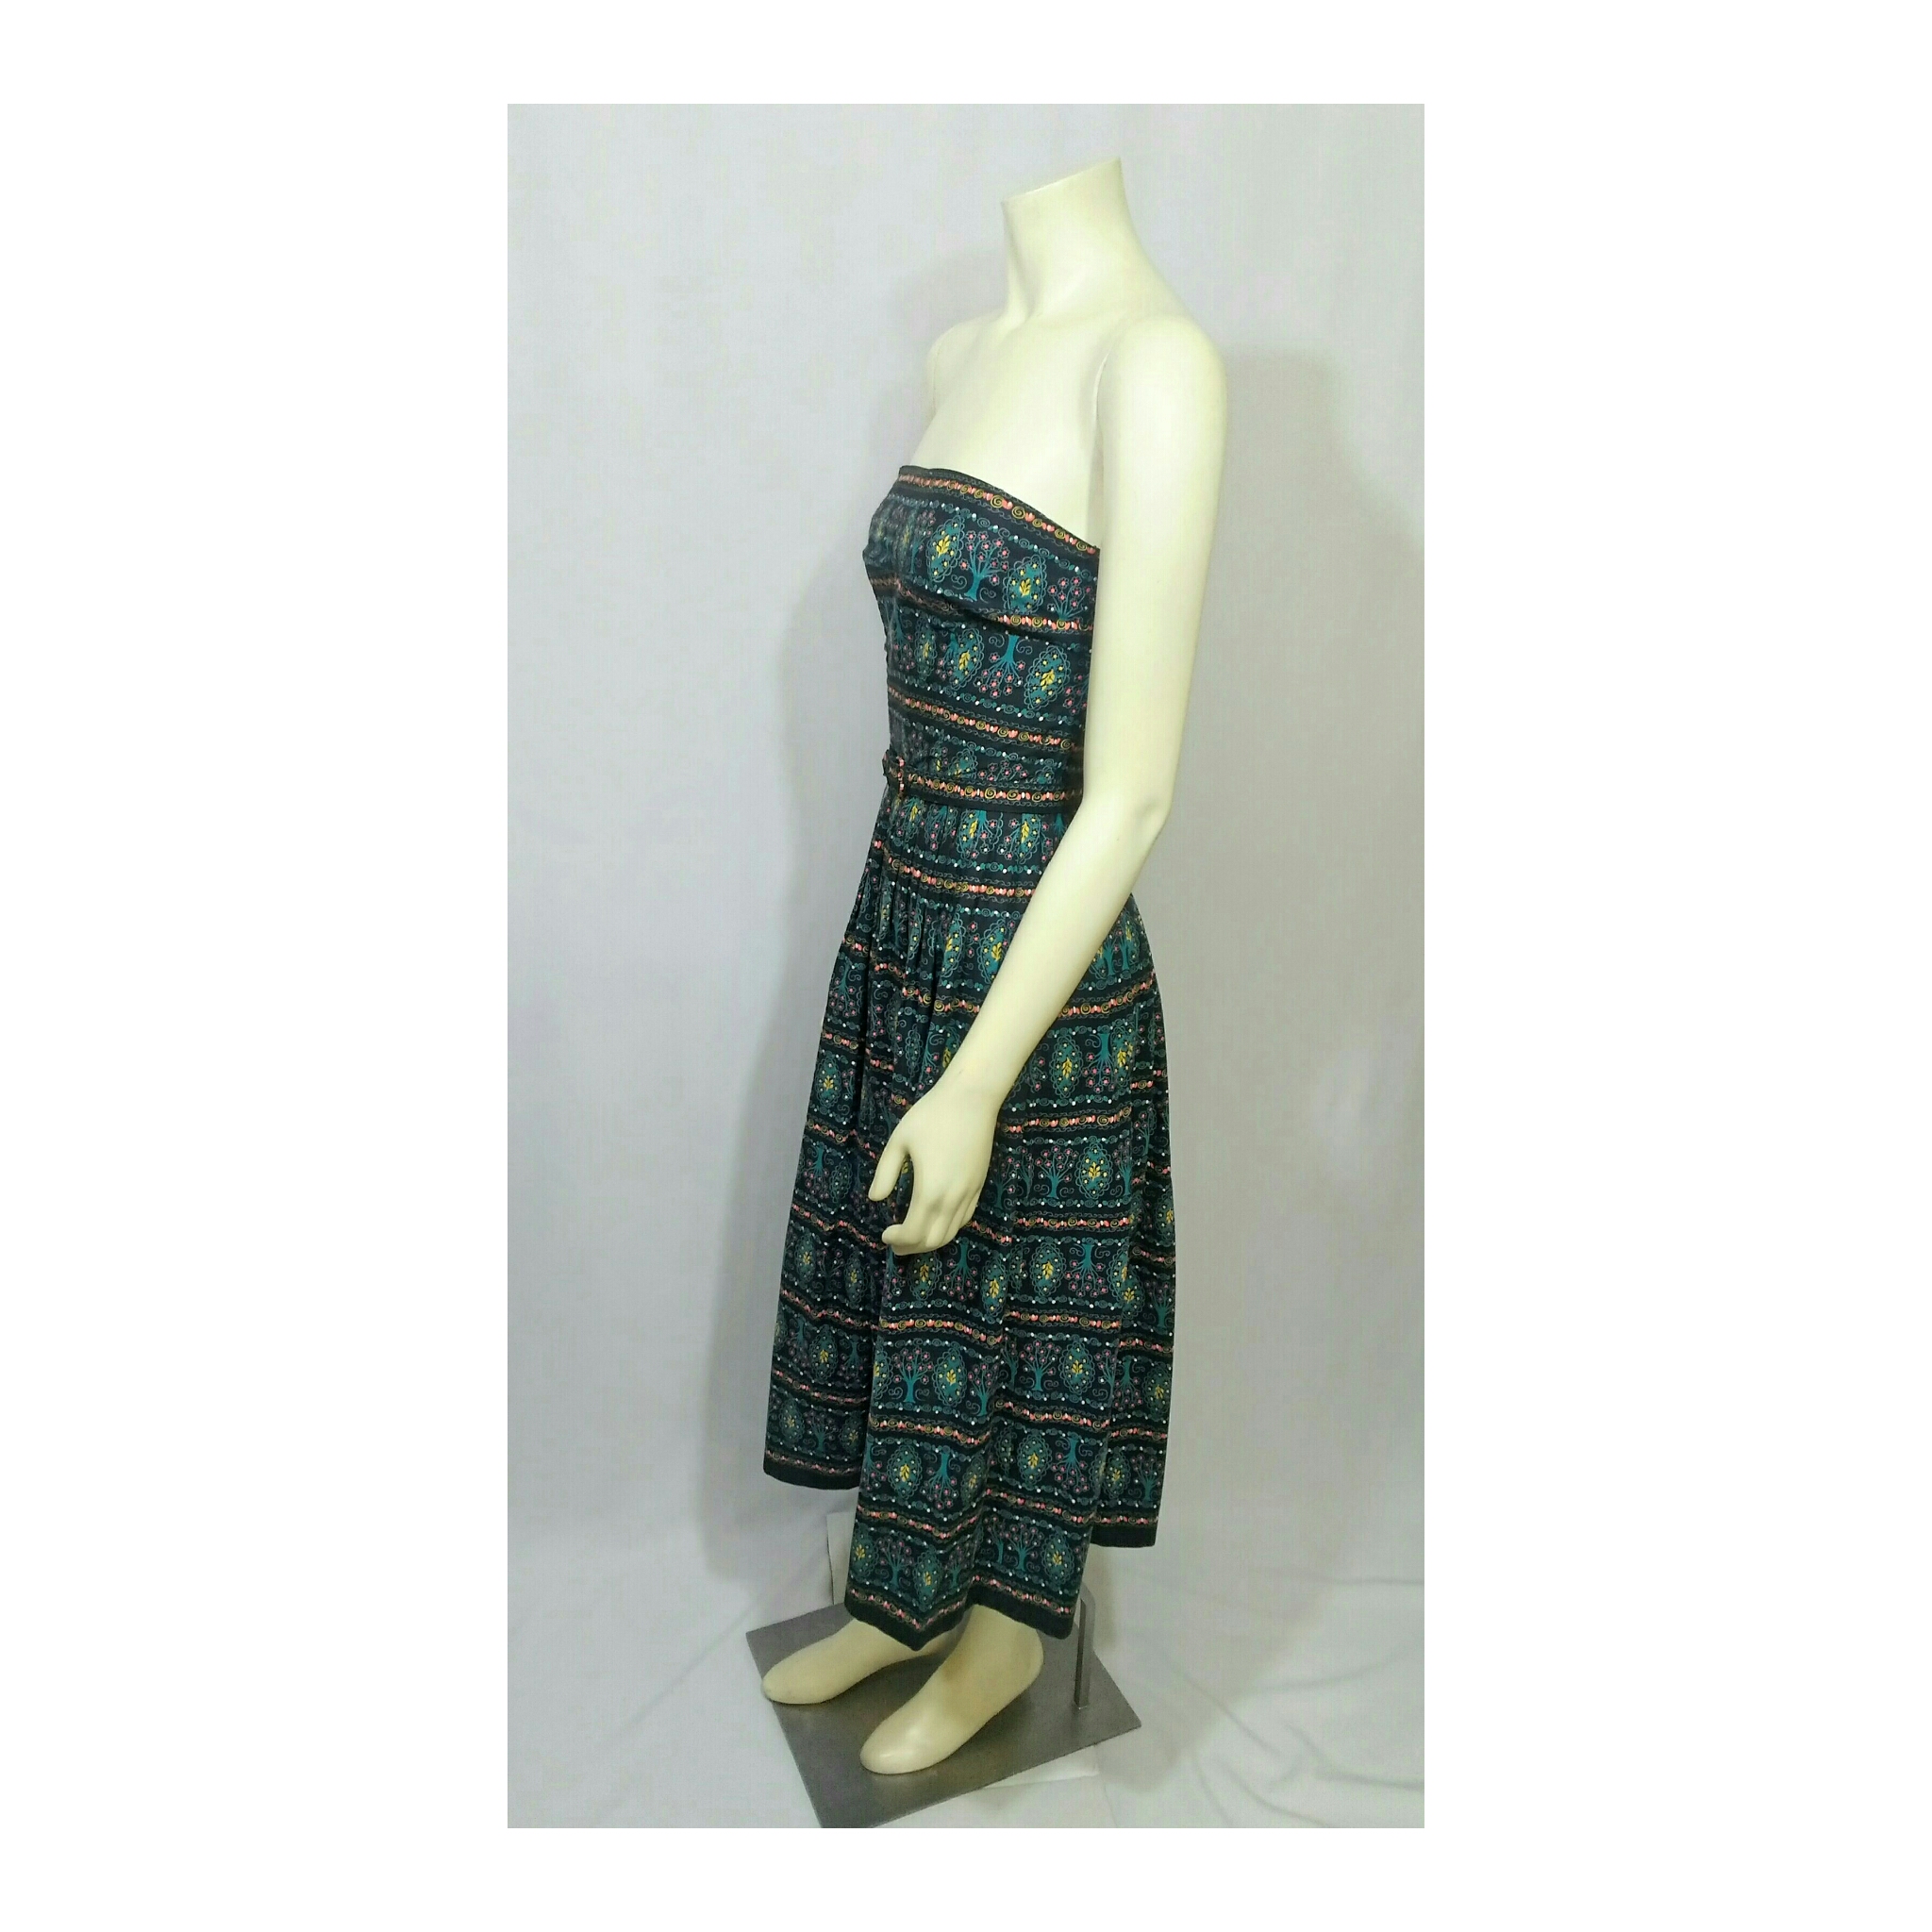 Vintage 1950’s Strapless Dress with Matching Shrug and Belt (Tree Patterned Design)